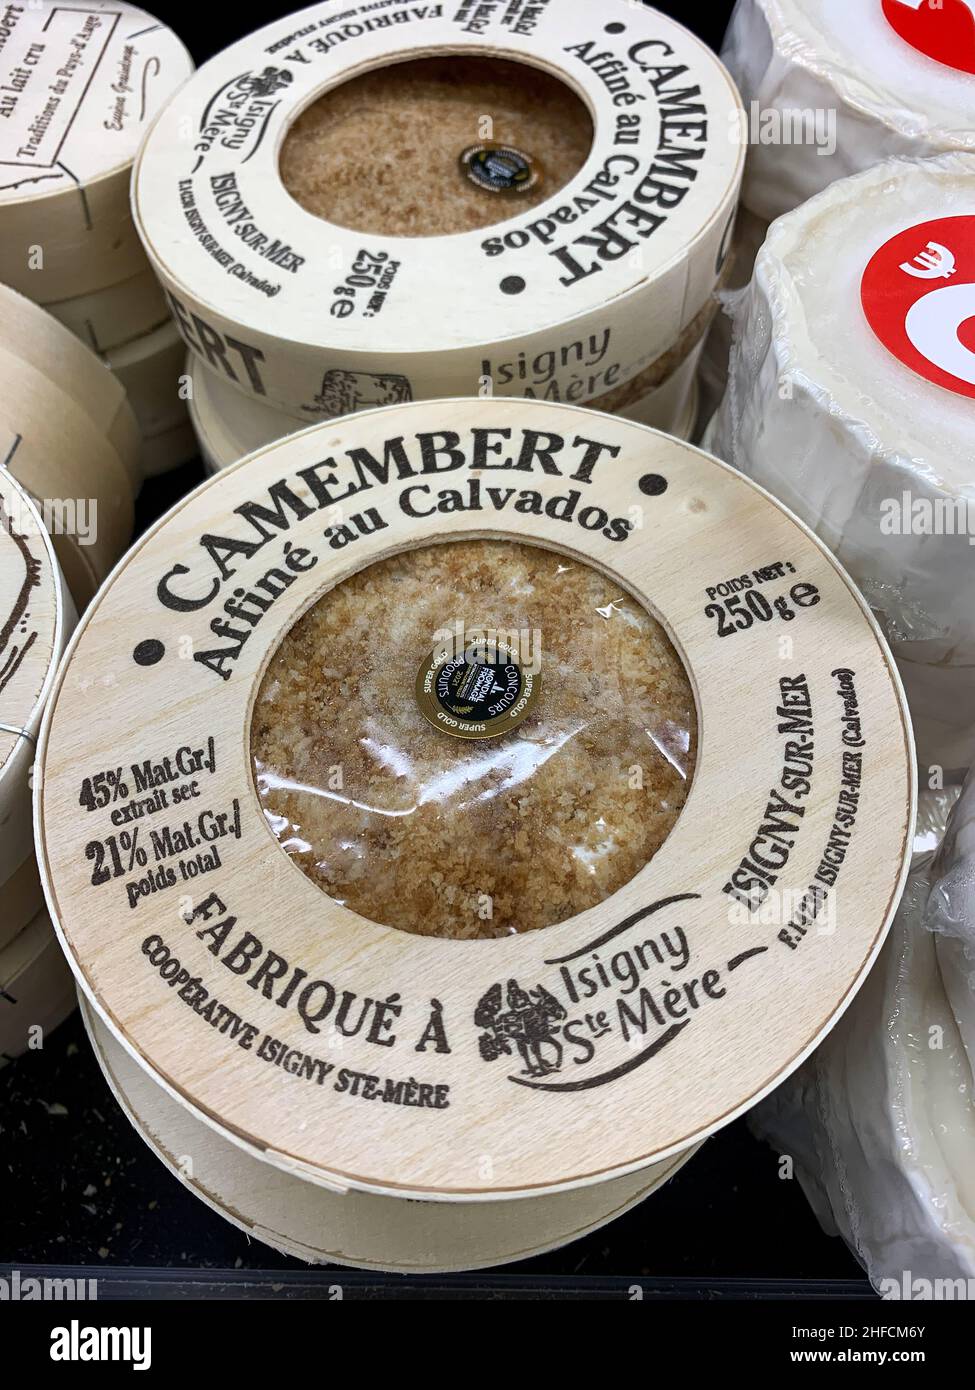 French cheese, displayed on a supermarket shelf, Lyon, France Stock Photo